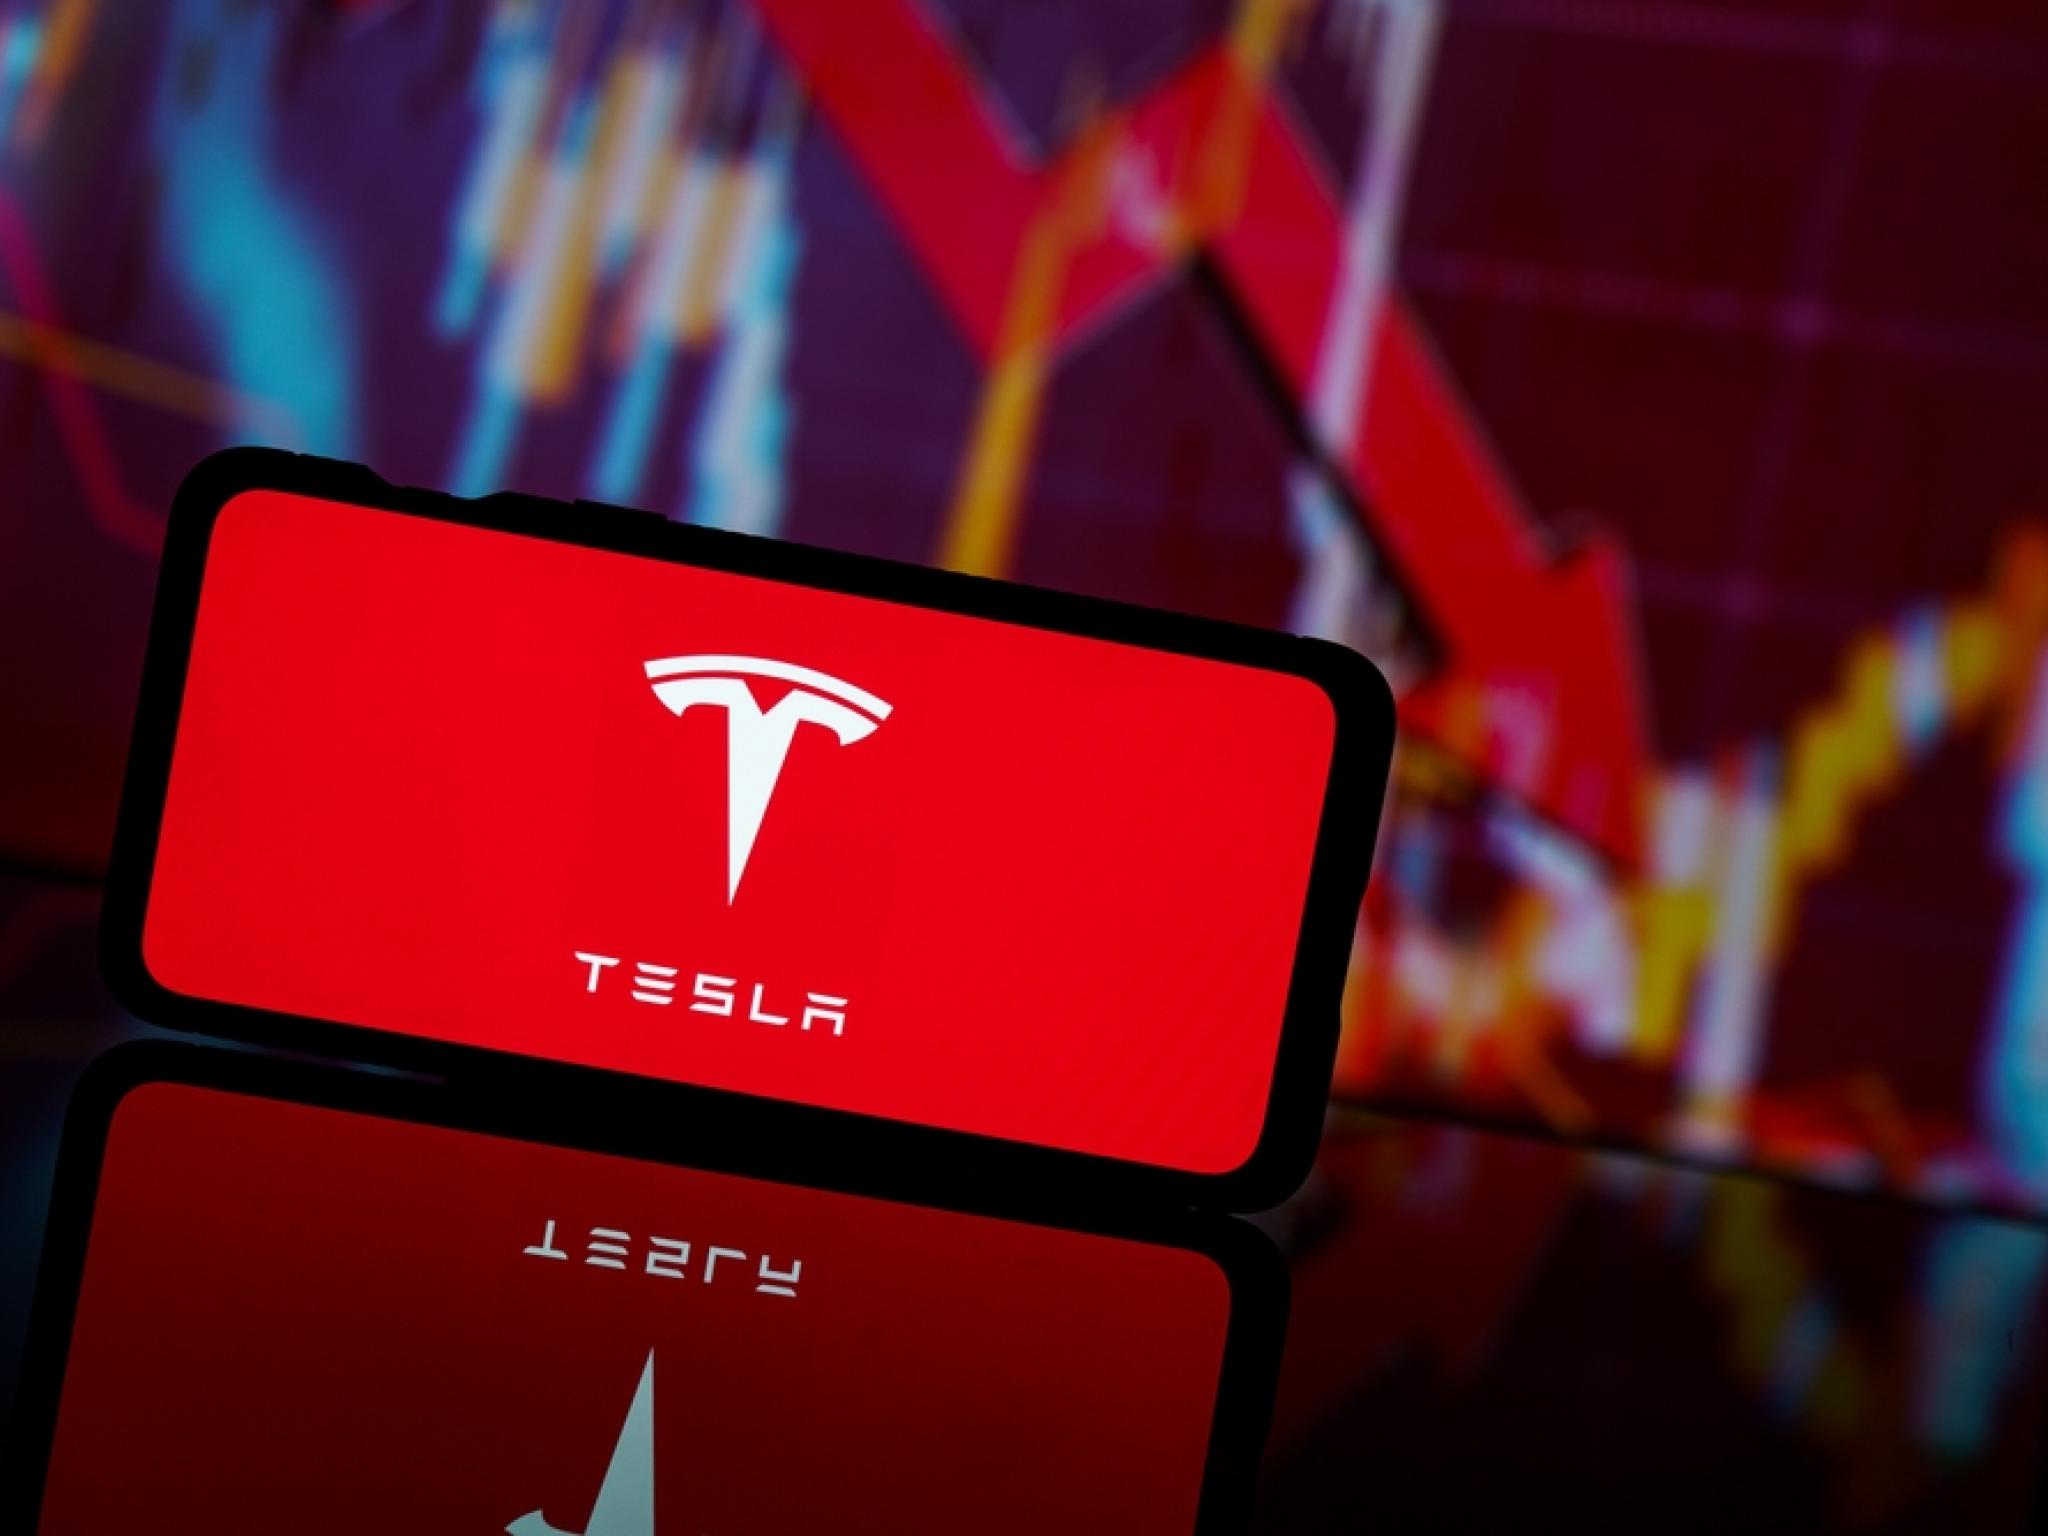  battered-tesla-stock-could-cave-in-further-as-demand-stutters-warns-bearish-analyst-thetruthhurts 